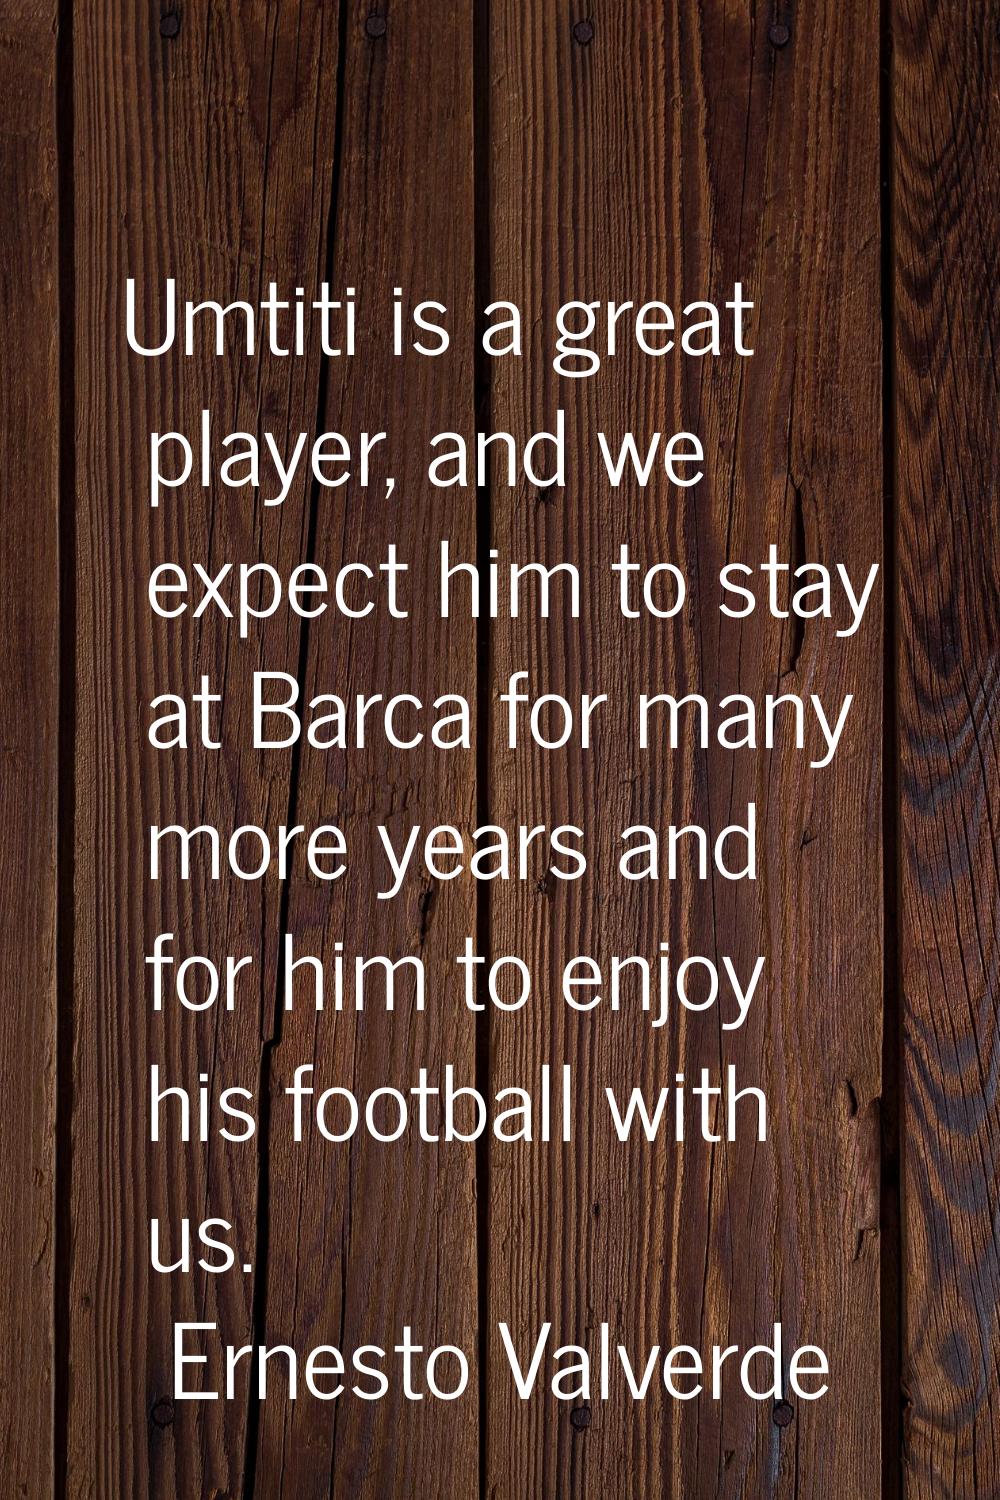 Umtiti is a great player, and we expect him to stay at Barca for many more years and for him to enj